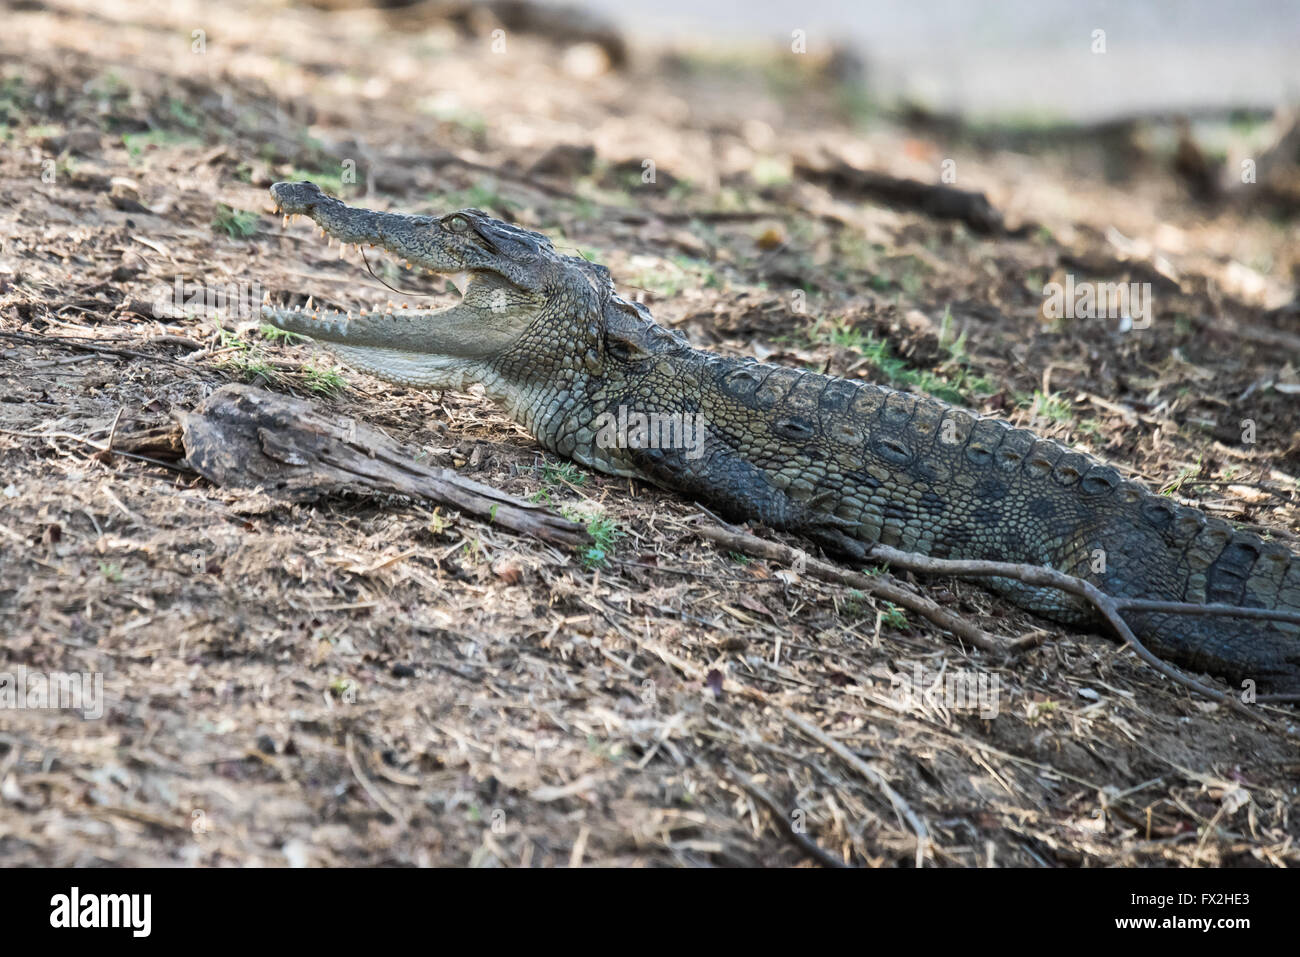 sub adult crocodile in search of foods Stock Photo